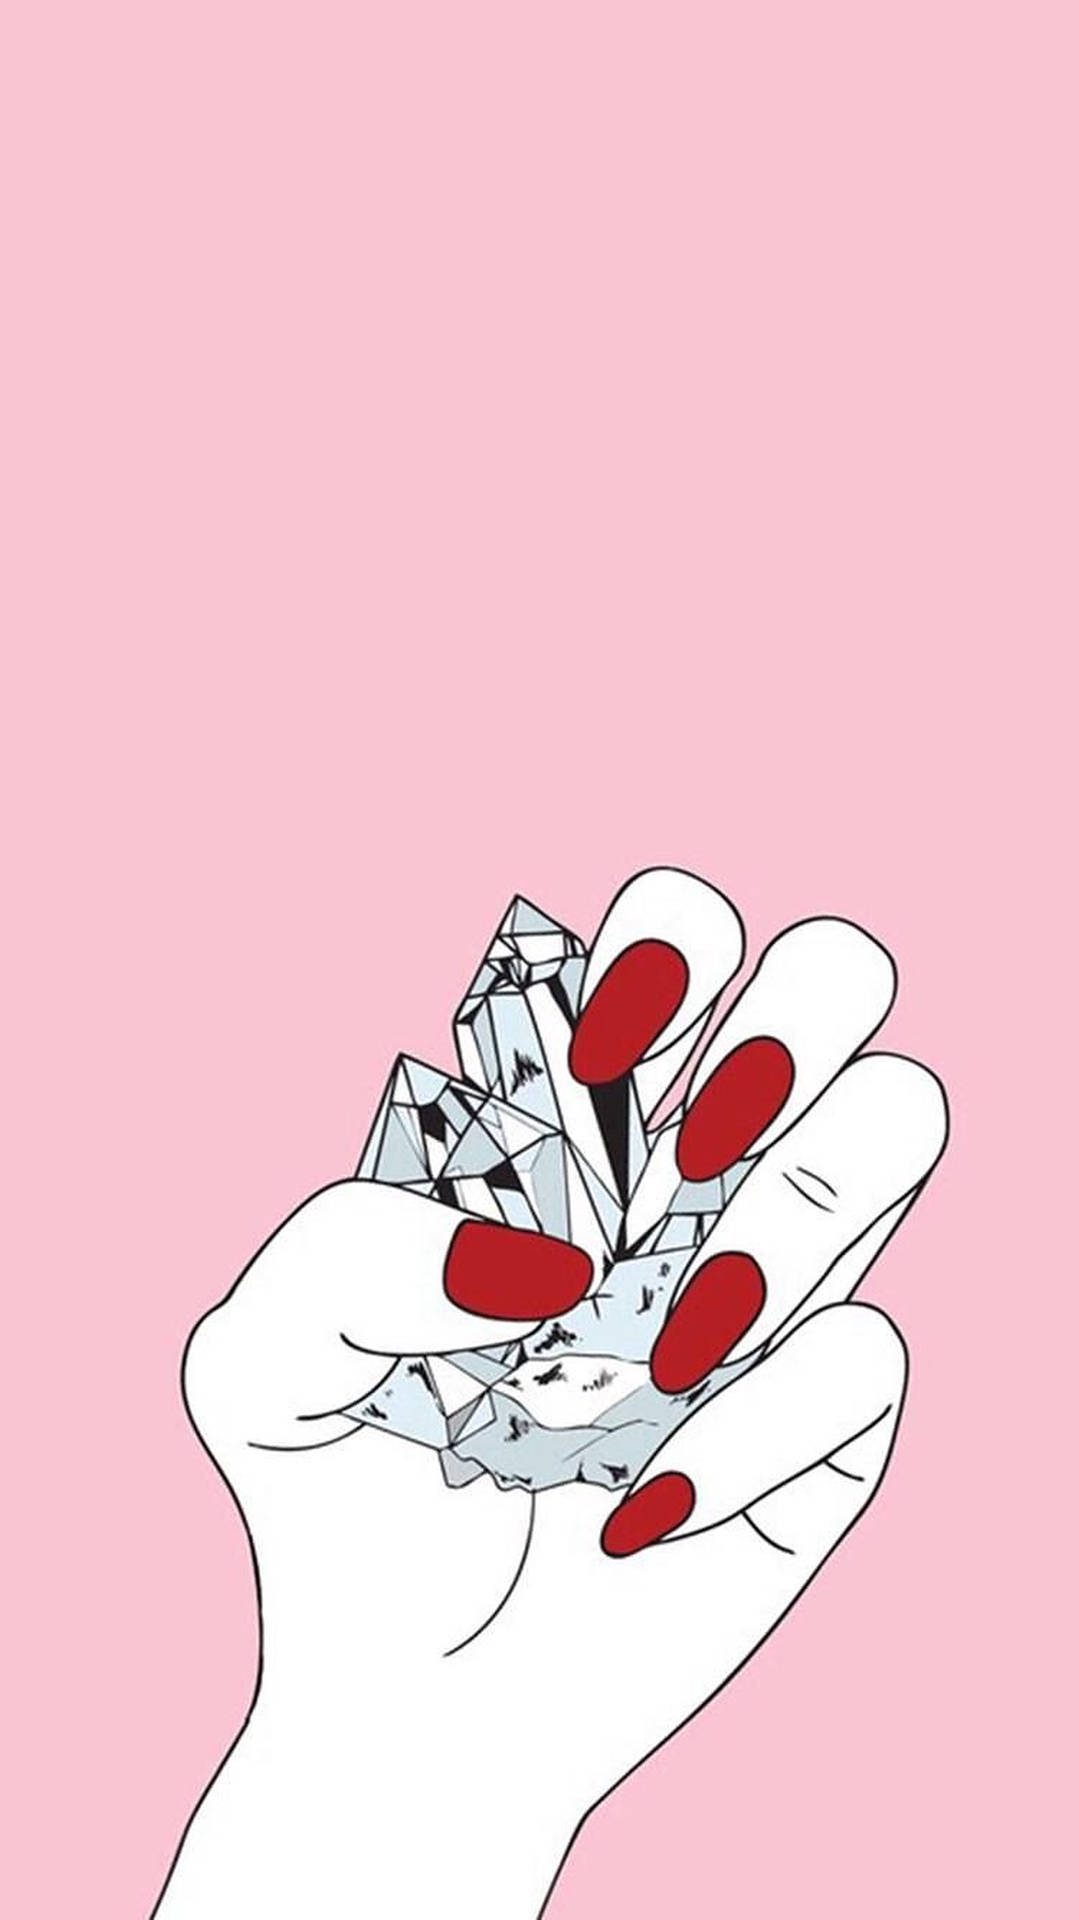 Red Nails Holding Crystal Background